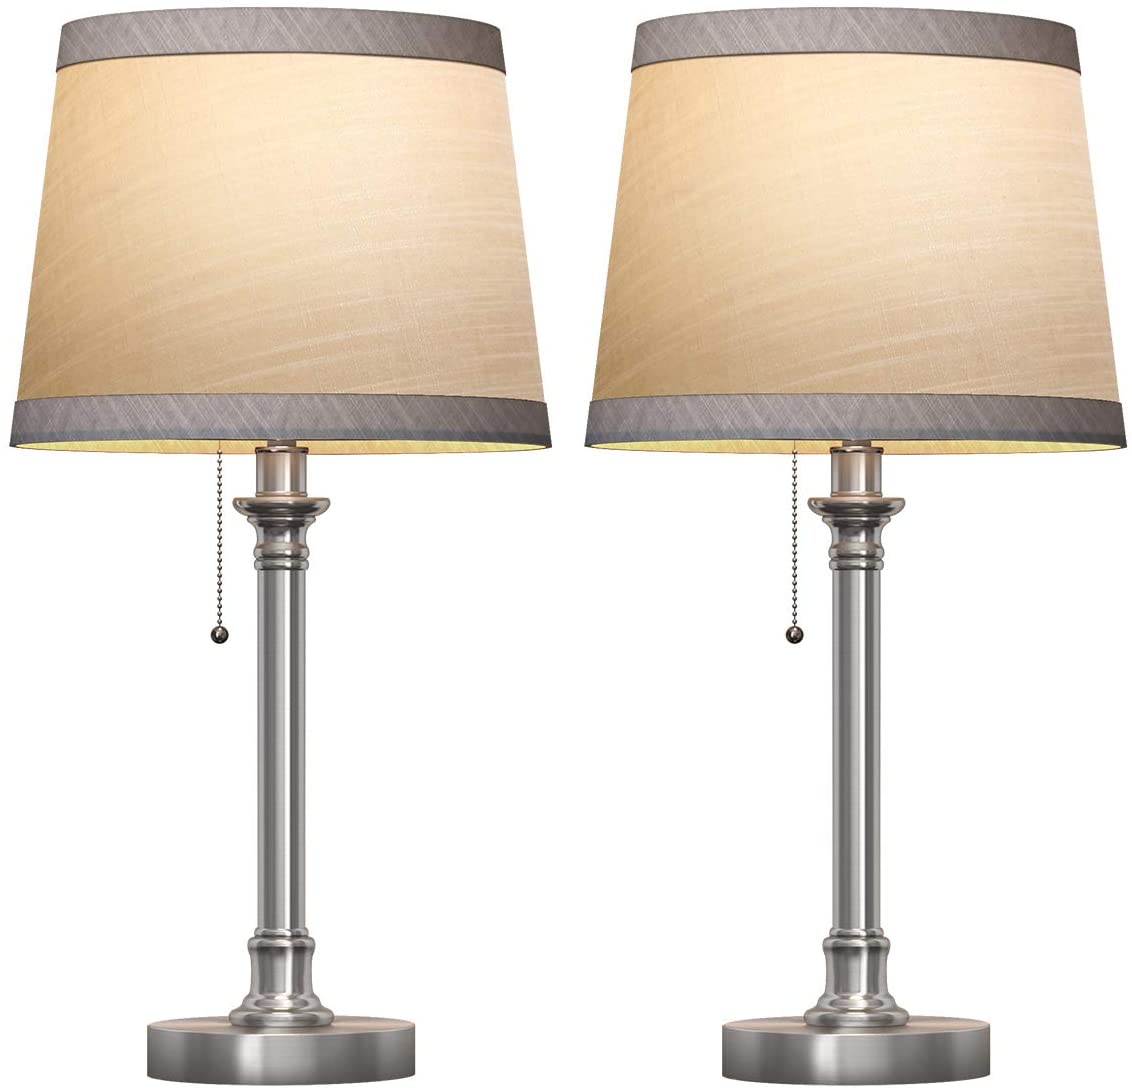 Oneach Modern Table Lamp Set of 2 for Bedroom Living Room Bedside Night